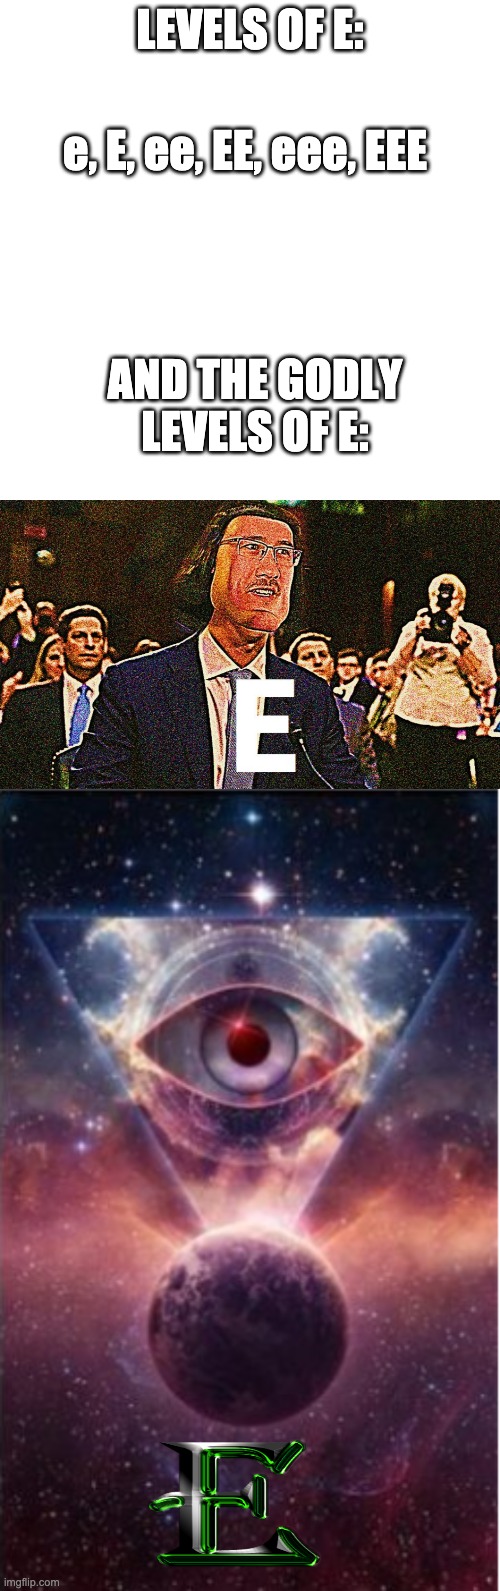 LEVELS OF E:; e, E, ee, EE, eee, EEE; AND THE GODLY LEVELS OF E: | image tagged in memes,blank transparent square,lord maarquad,godly | made w/ Imgflip meme maker